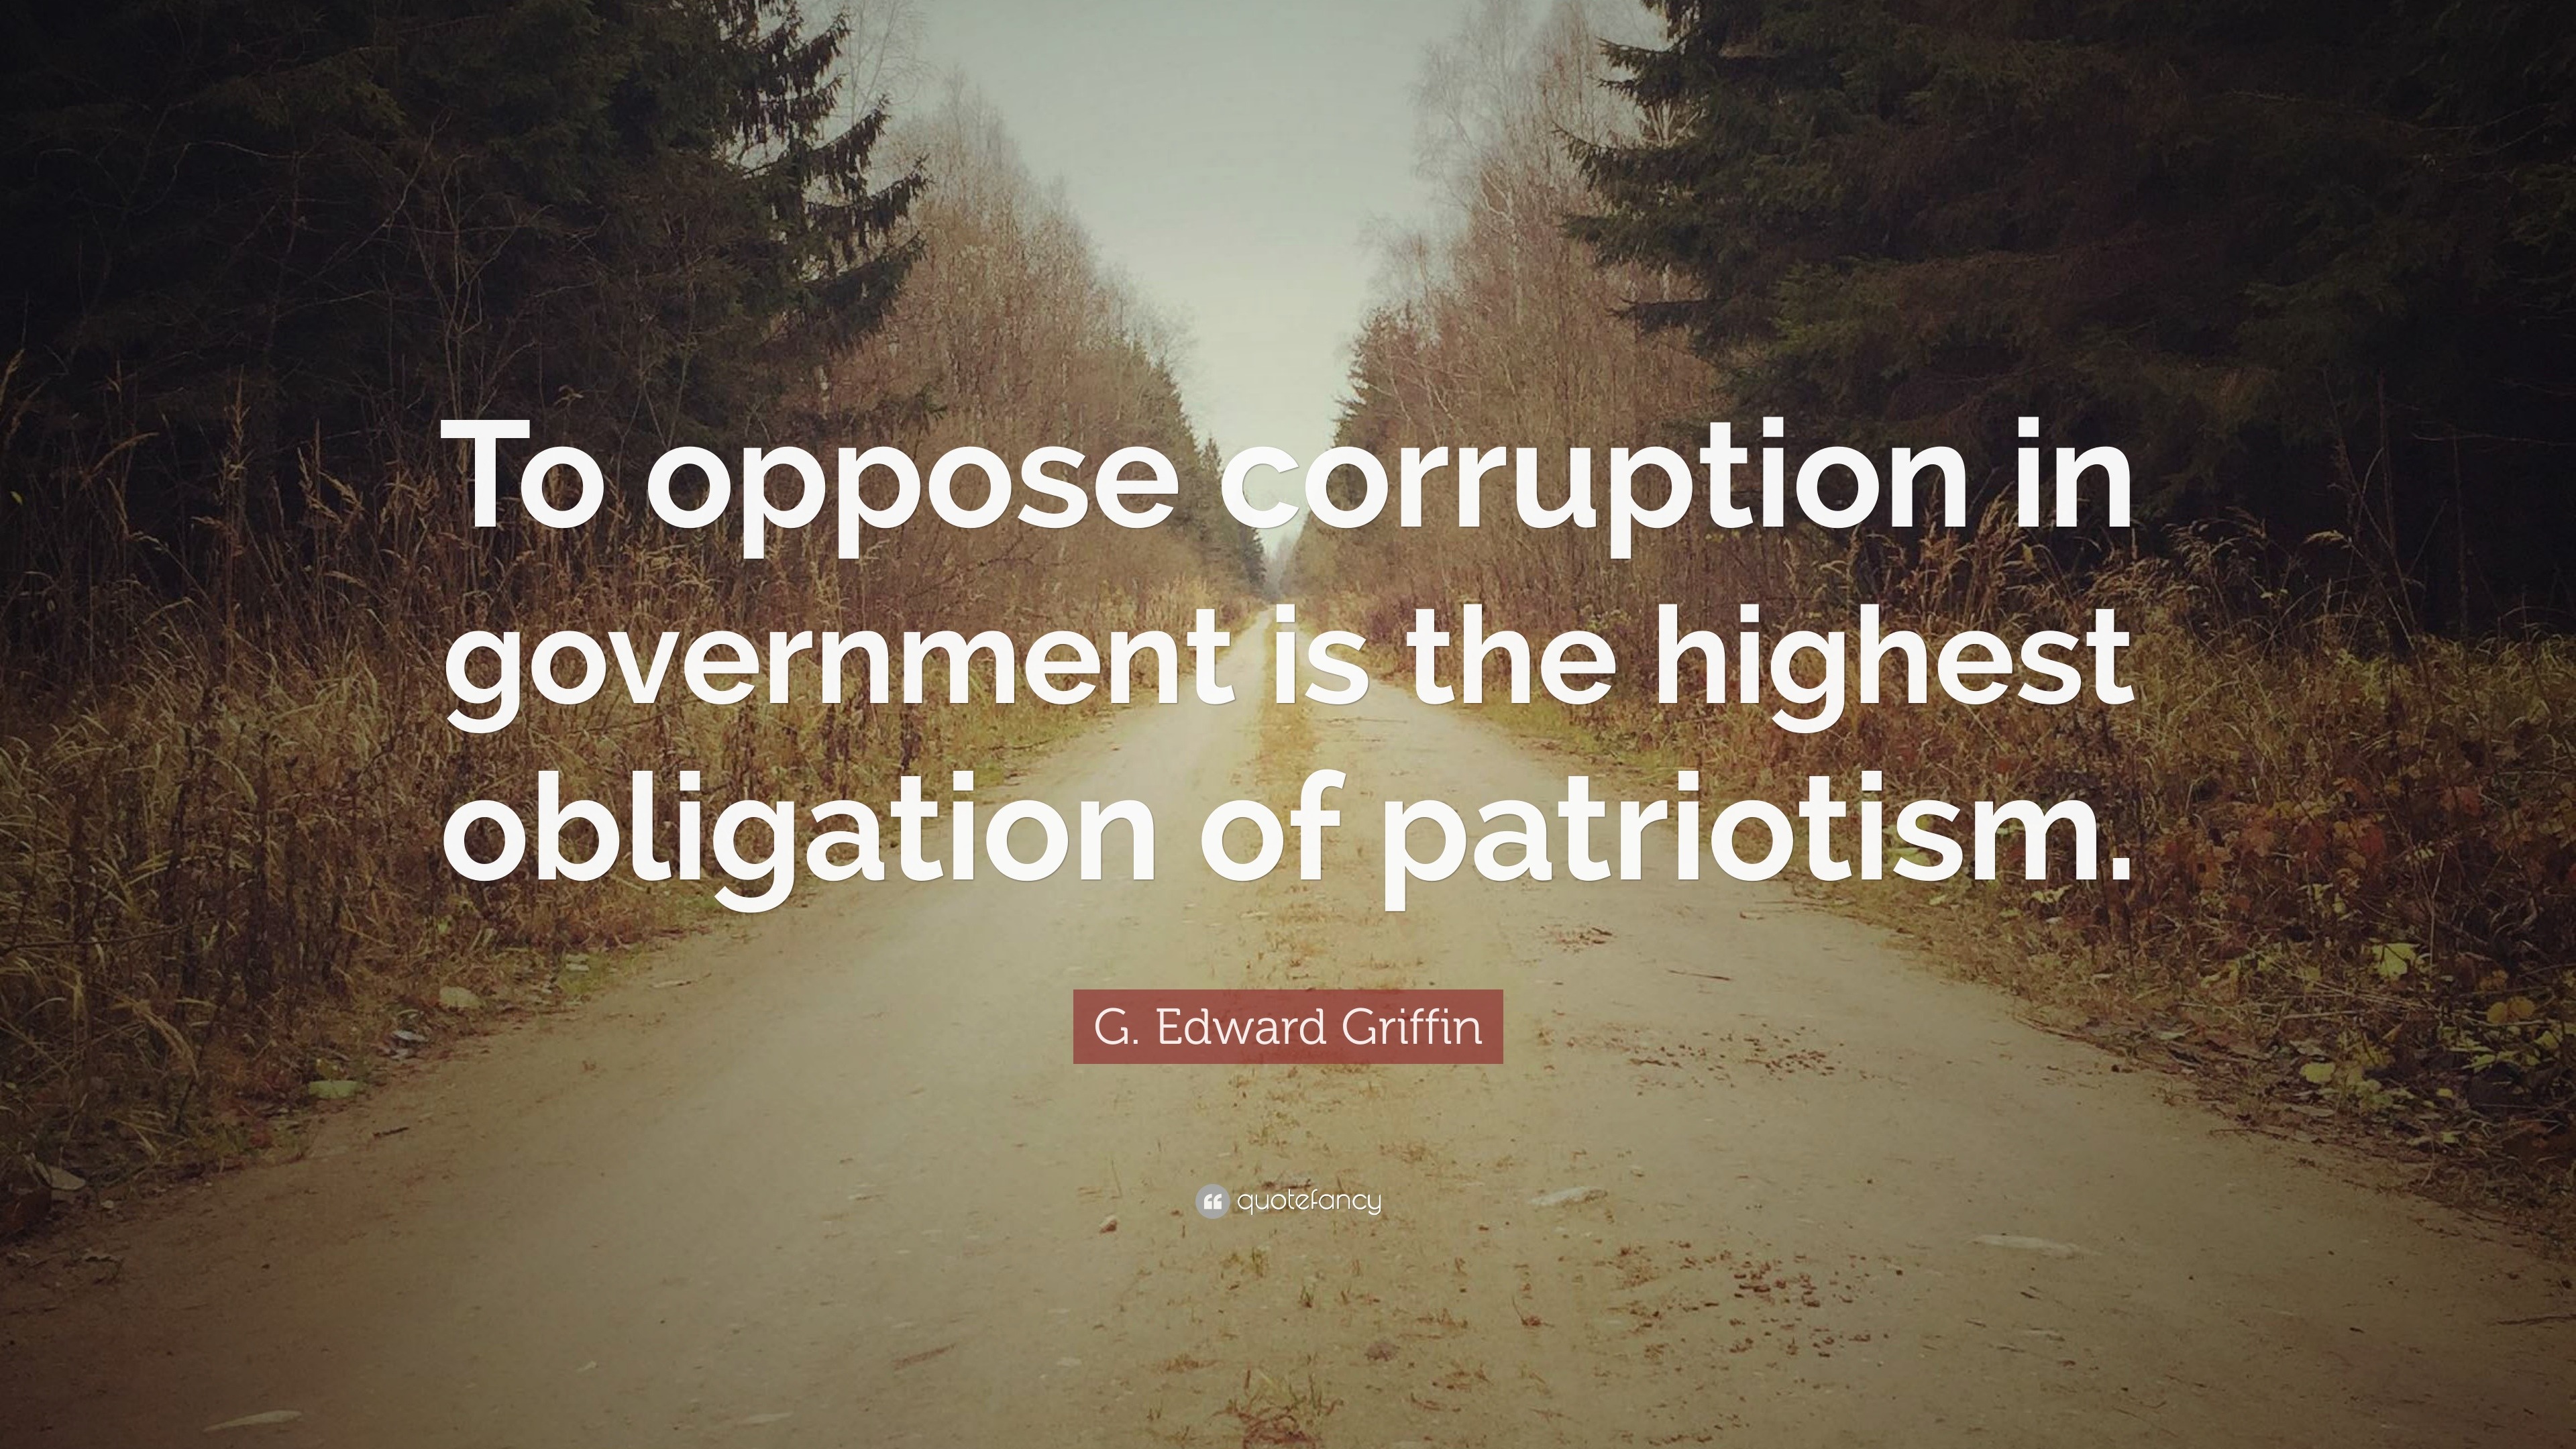 G. Edward Griffin Quote: “To oppose corruption in government is the highest obligation of patriotism.”